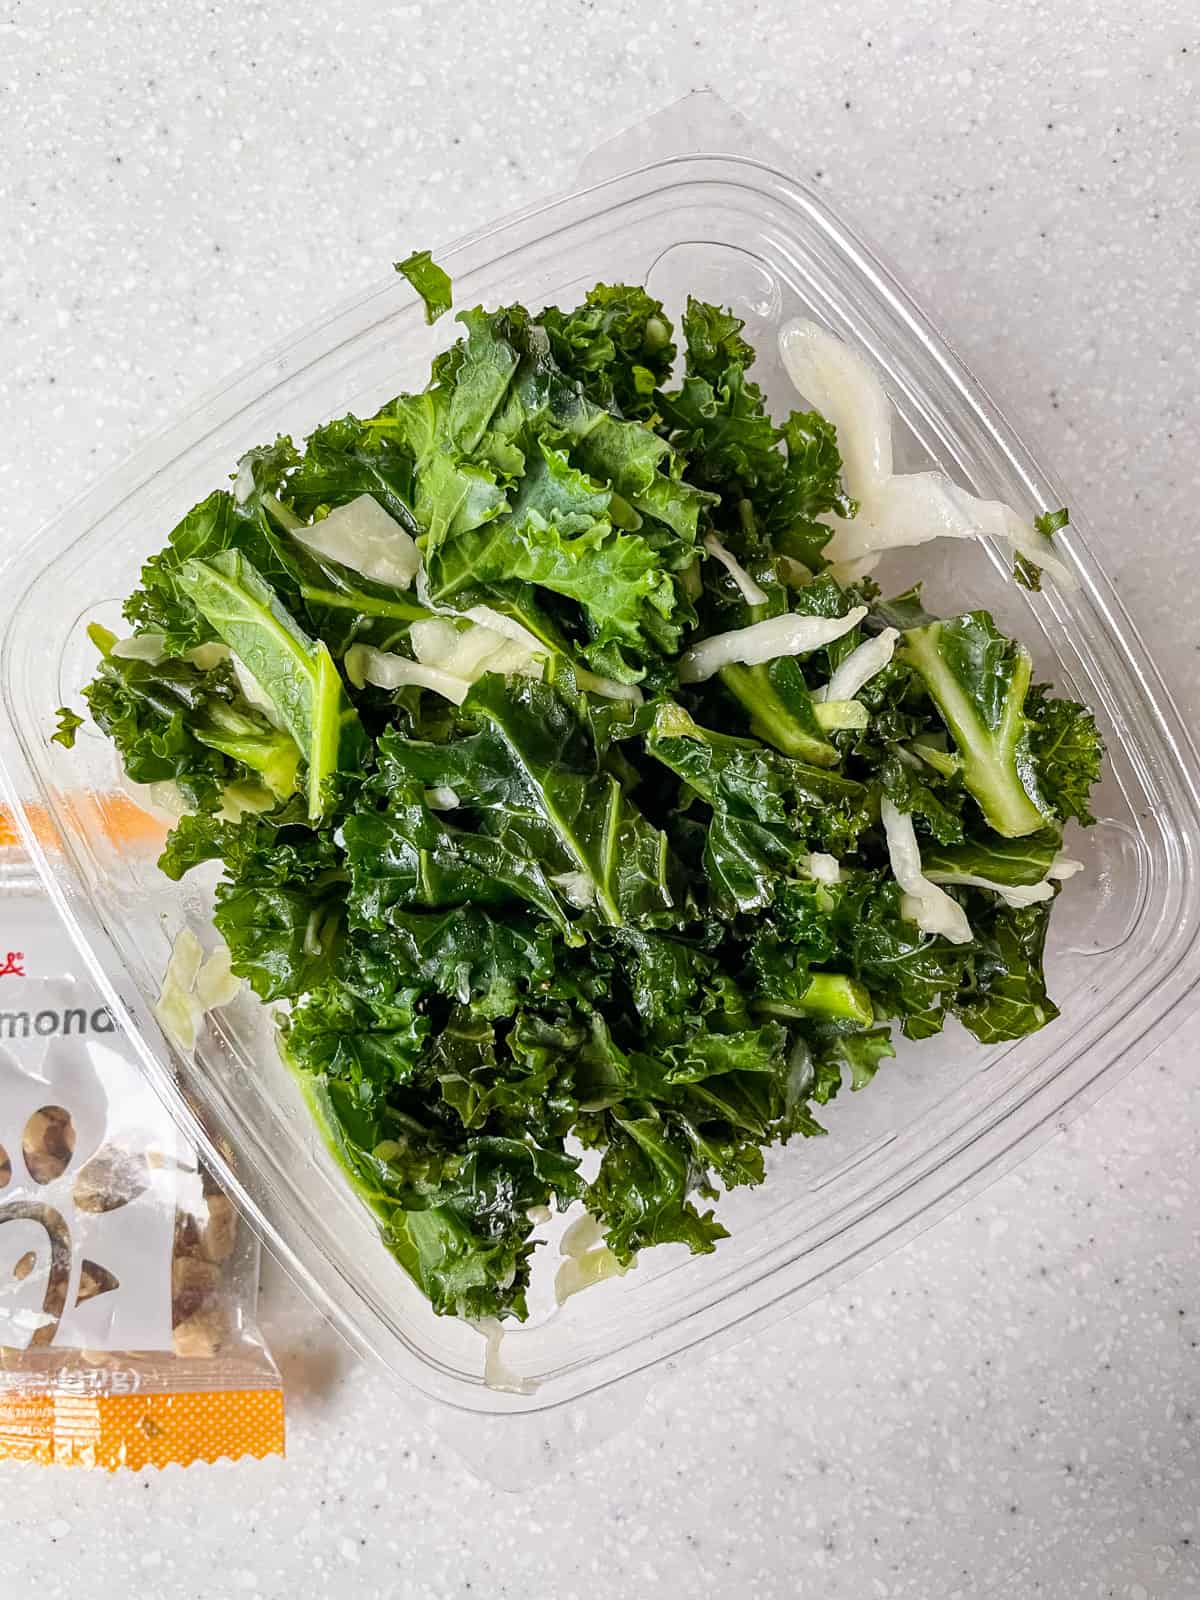 Process chick-fil-a kale crunch salad in plastic container